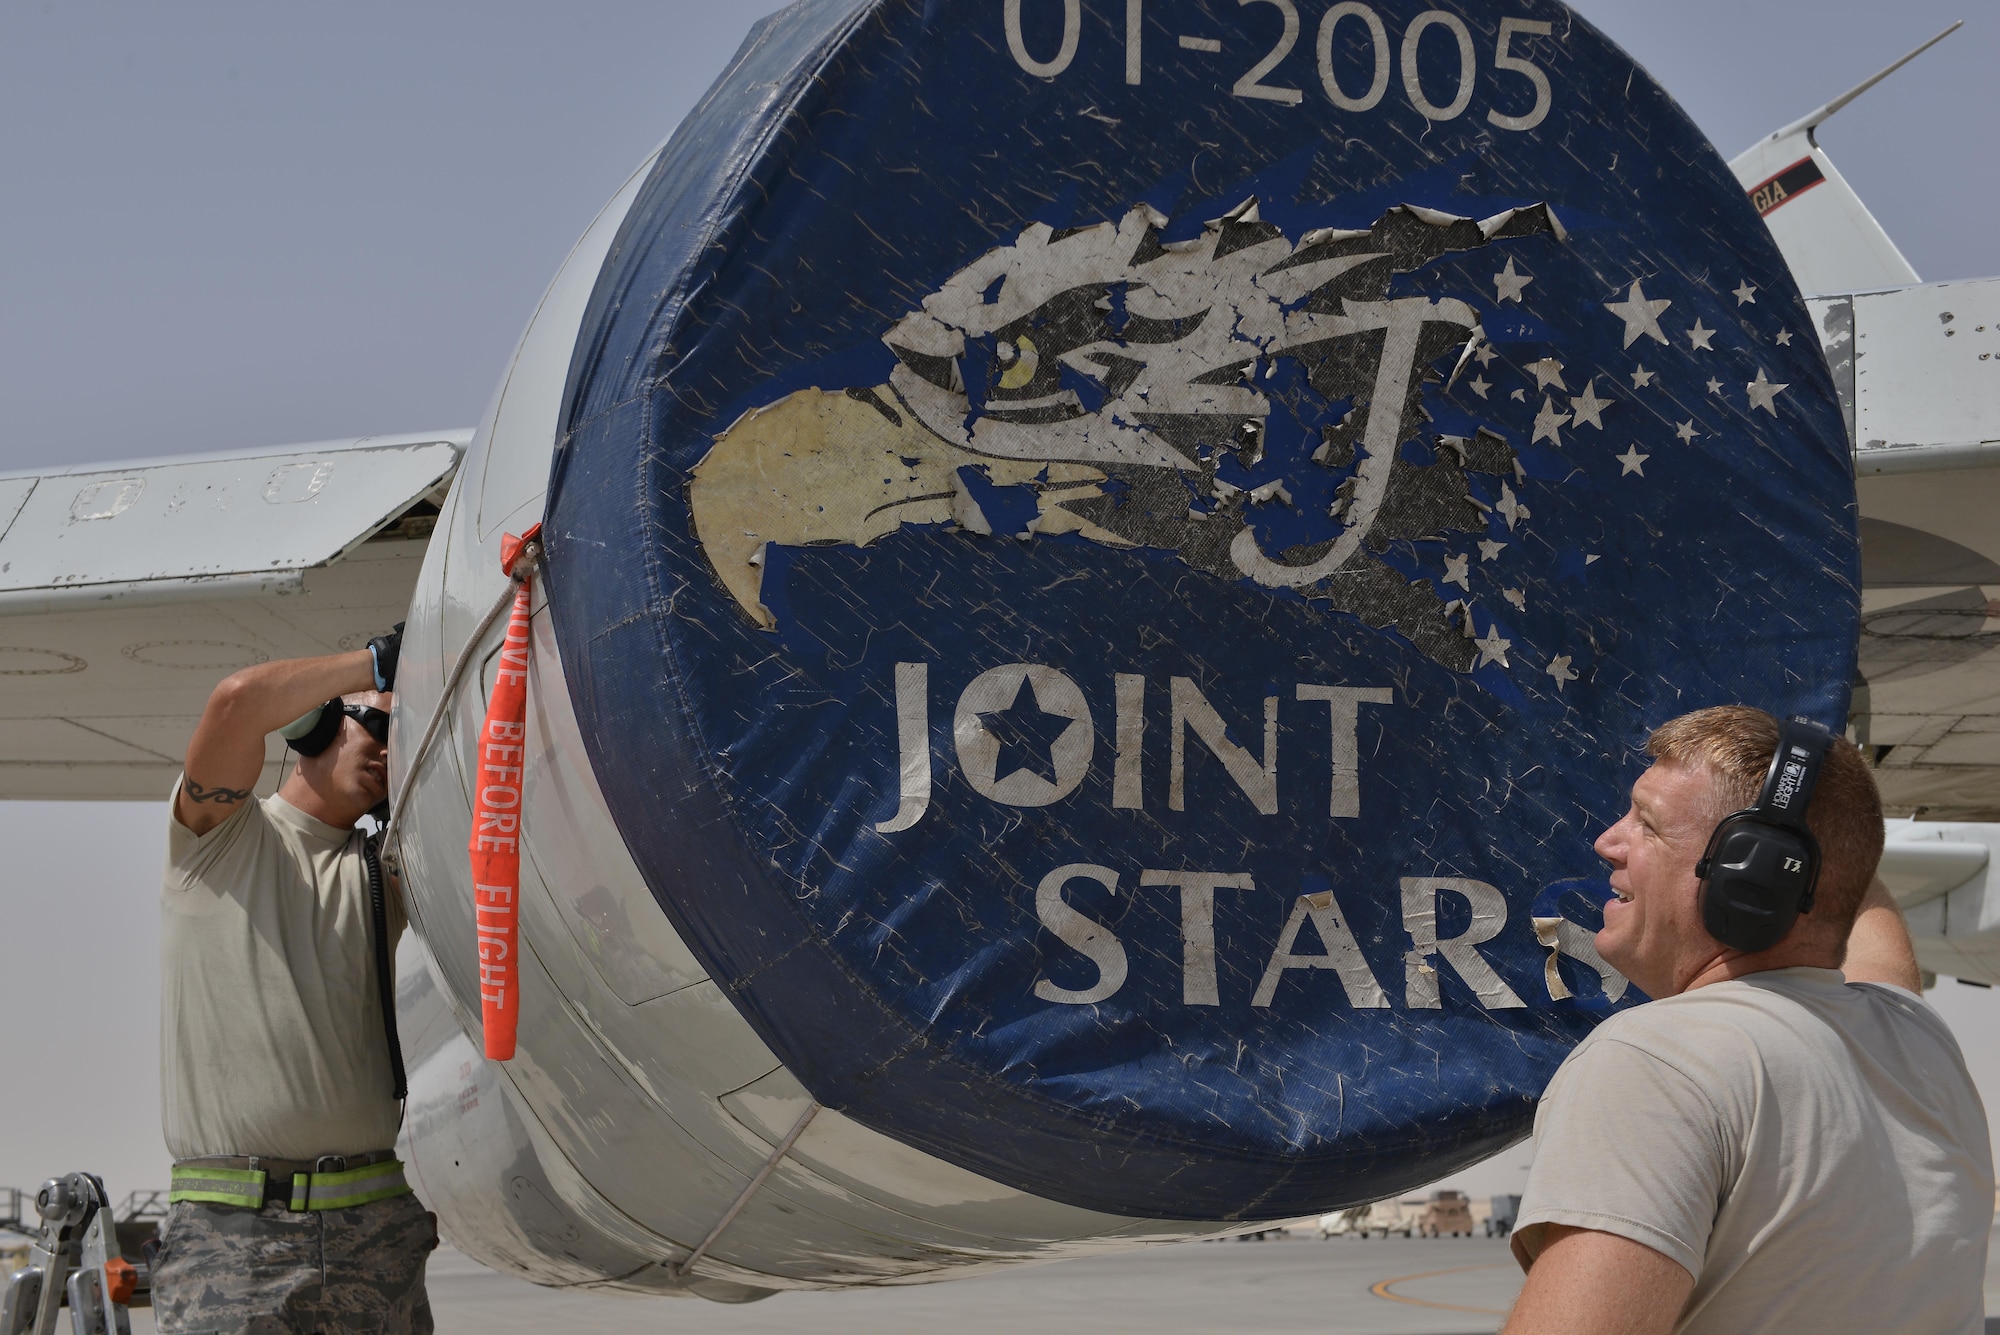 Airmen from the 7th Air Mobility Unit maintenance cover the engines of a Boeing E-8C Joint Surveillance Target Attack Radar Systems June 2, 2015 Al Udeid Air Base, Qatar. The E-8C JSTARS and its active duty, guard and reserve service members conduct missions overseas to support operations on the war on terror. During this time JSTARS completed 100K combat hours by continually flying 24/7 for 11.4 years. (U.S. Air Force photo/Staff Sgt. Alexandre Montes)) 